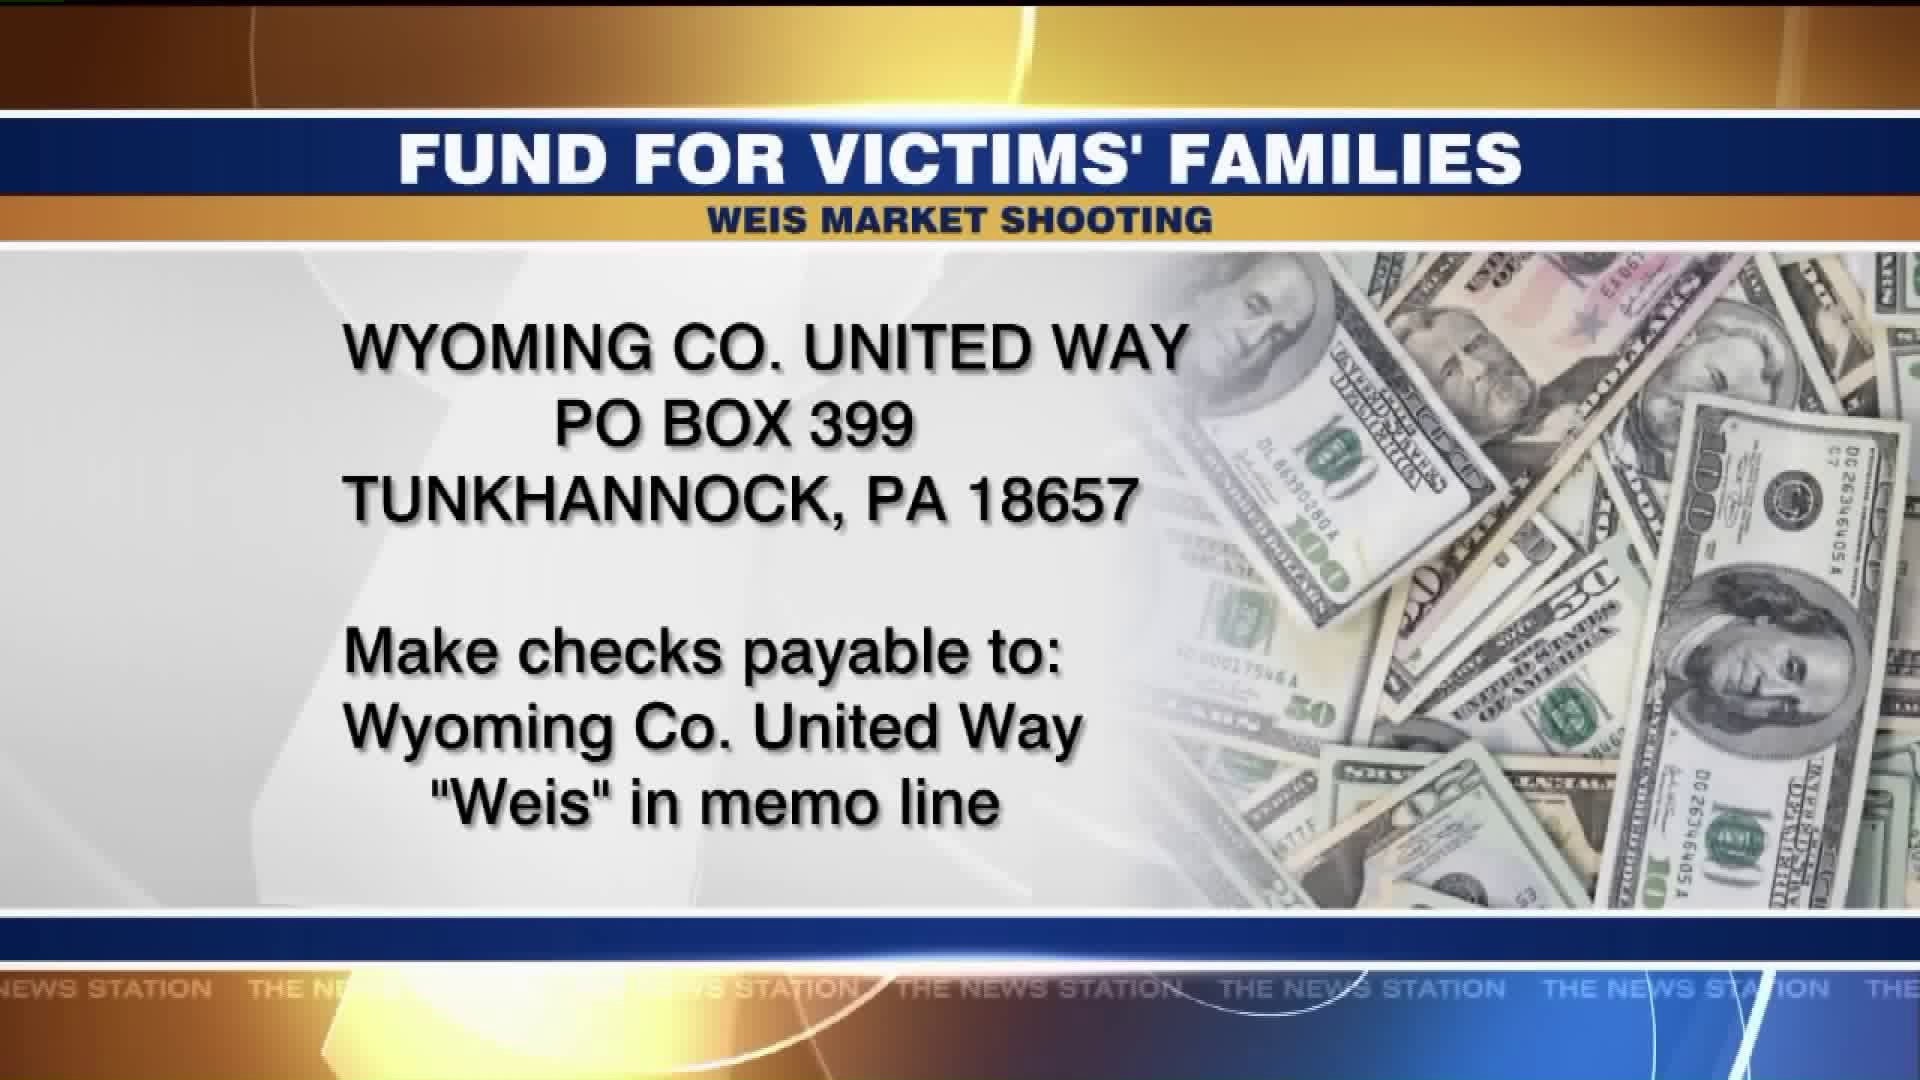 Wyoming County United Way to Help Families of Supermarket Shooting